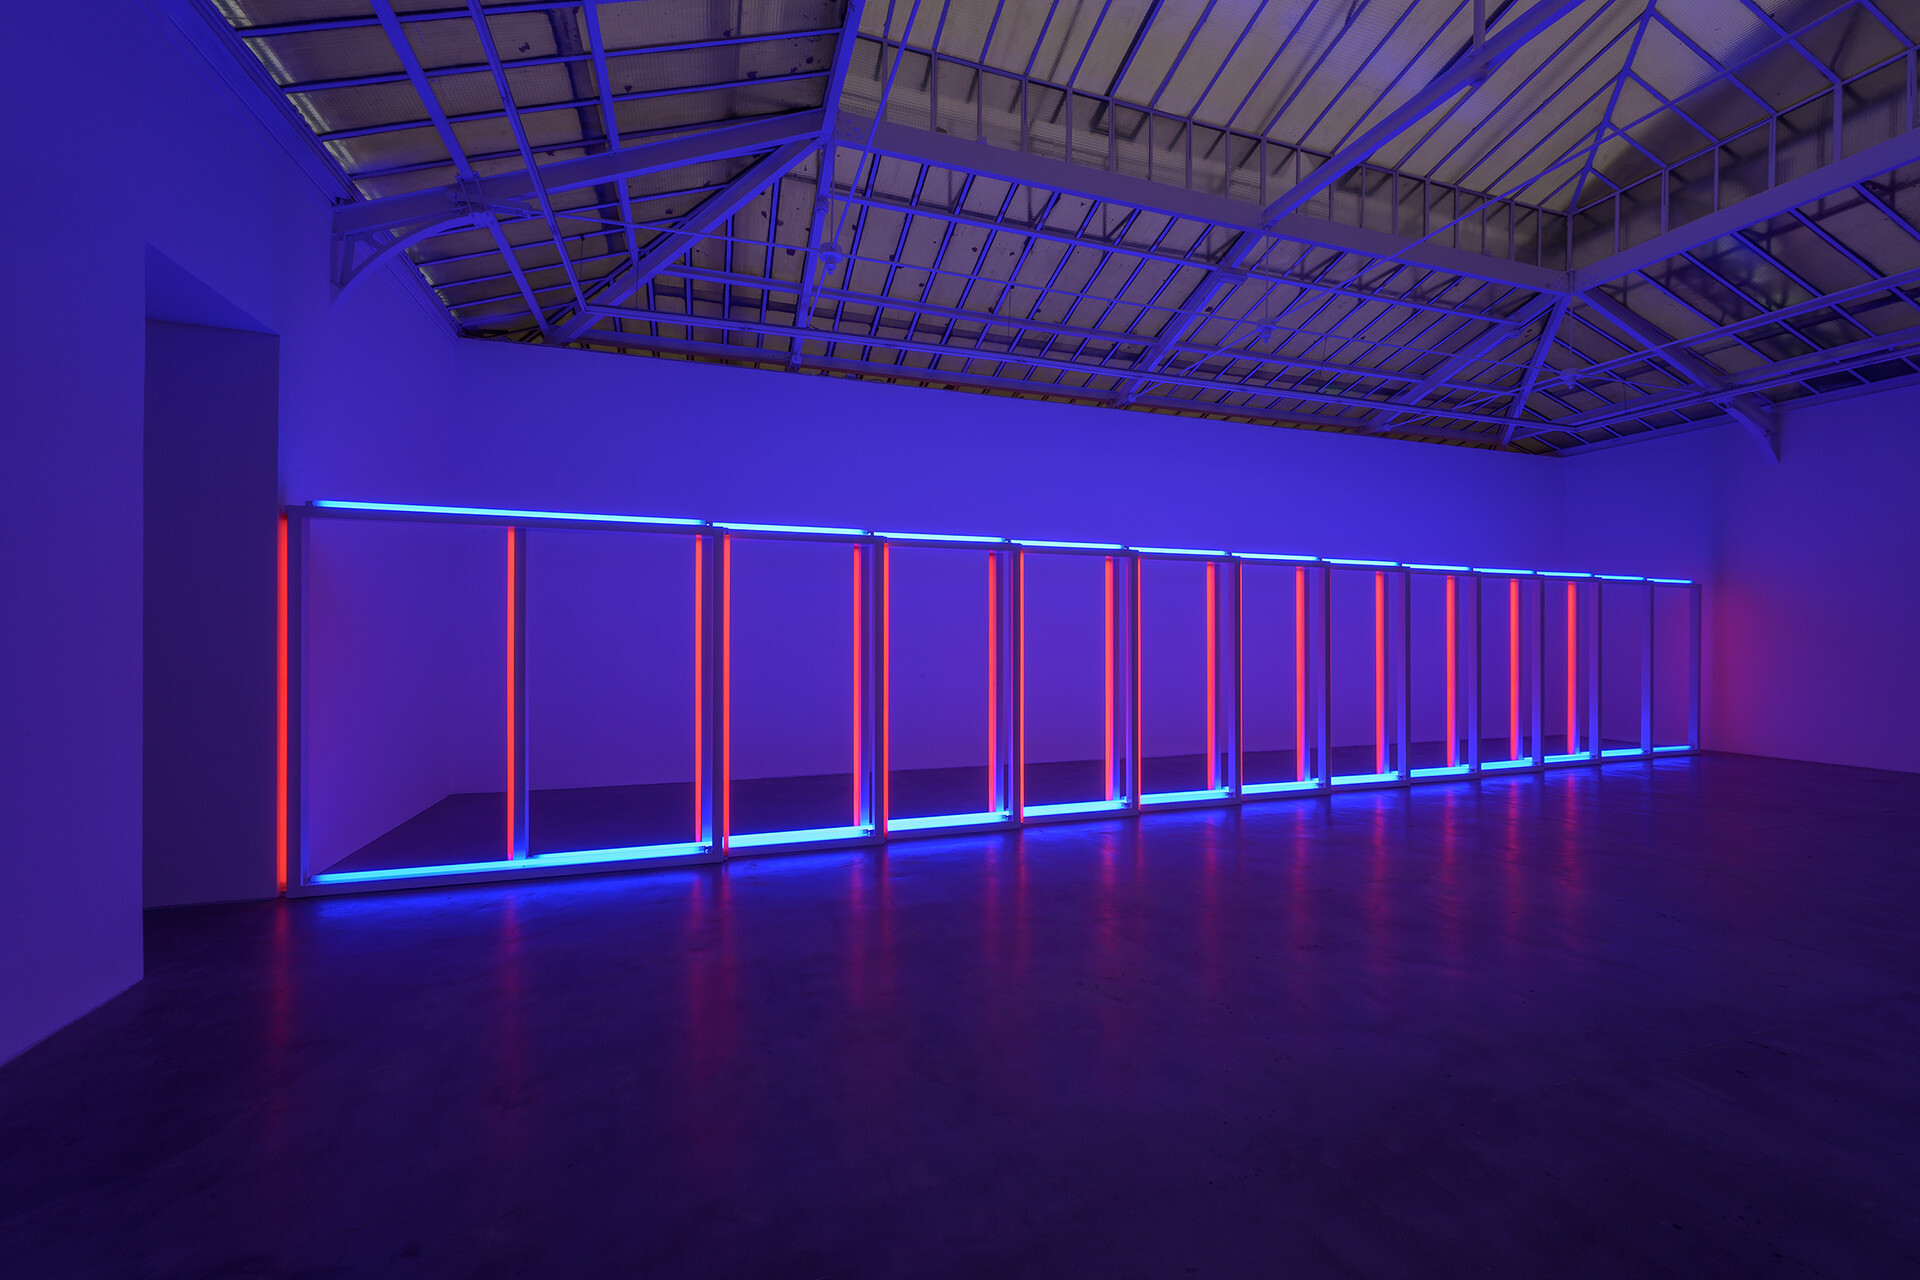 An untitled work by Dan Flavin, dated 1970.